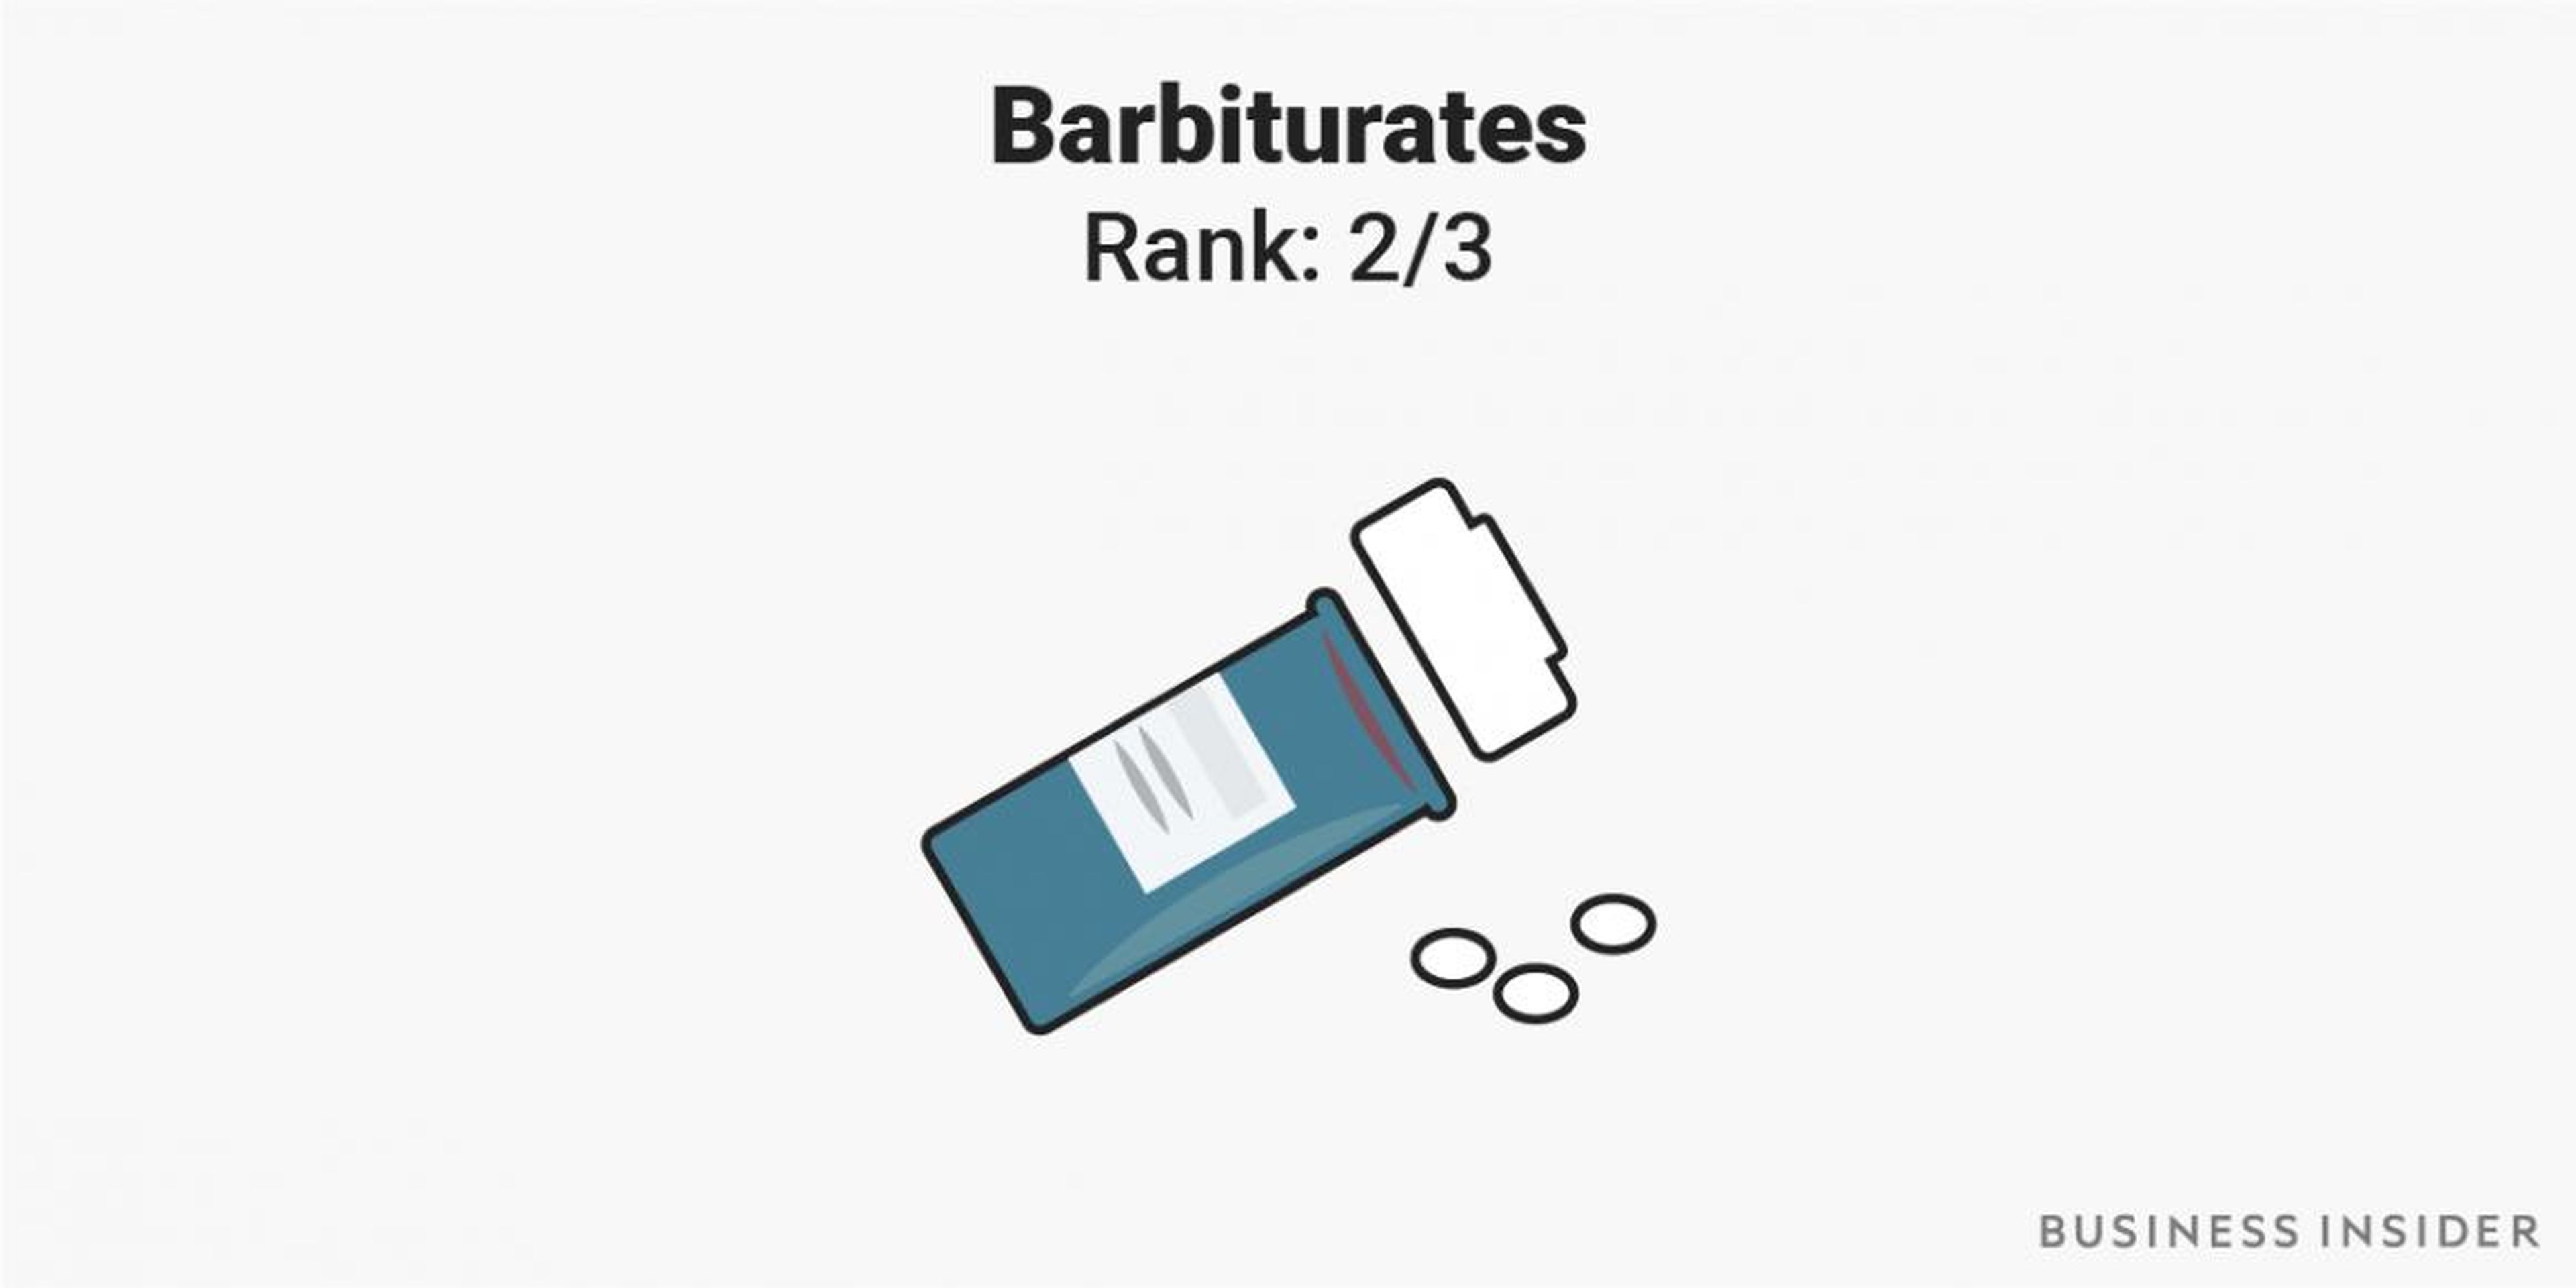 4. Barbiturates are sedative drugs that were once widely prescribed for anxiety.